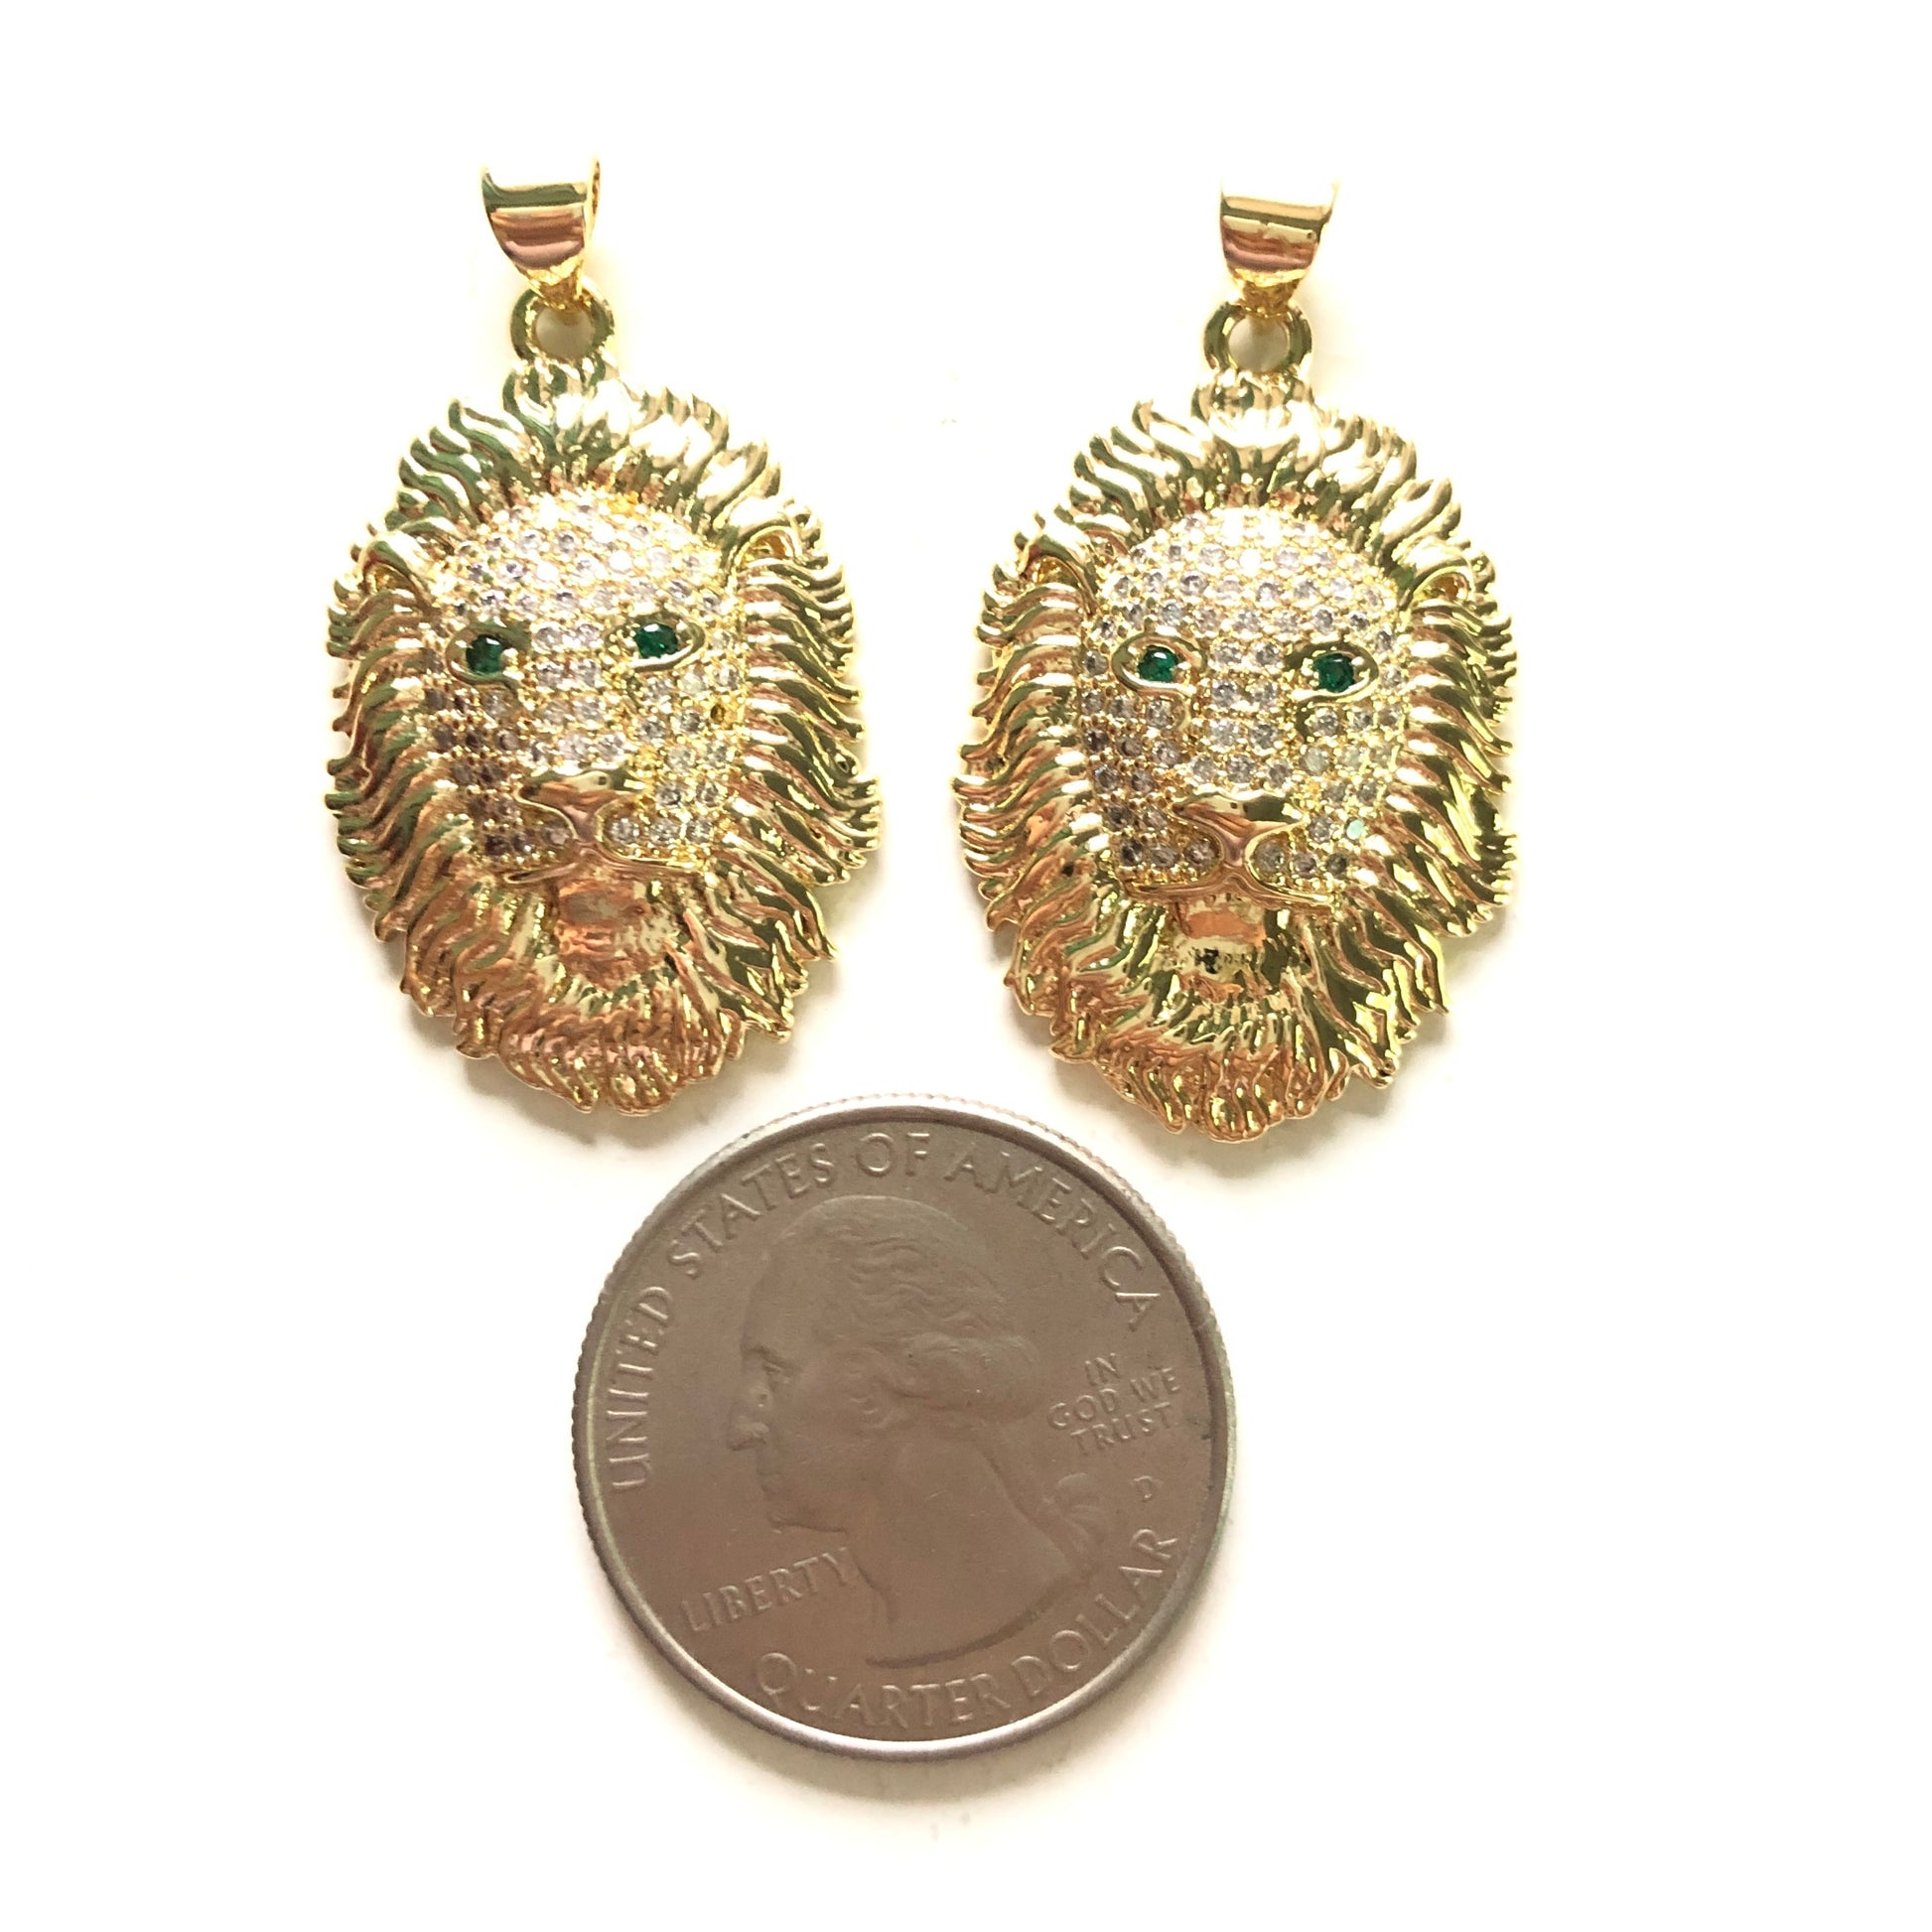 5pcs/lot 31*21mm Gold CZ Lion Charm Pendants CZ Paved Charms Animals & Insects Charms Beads Beyond